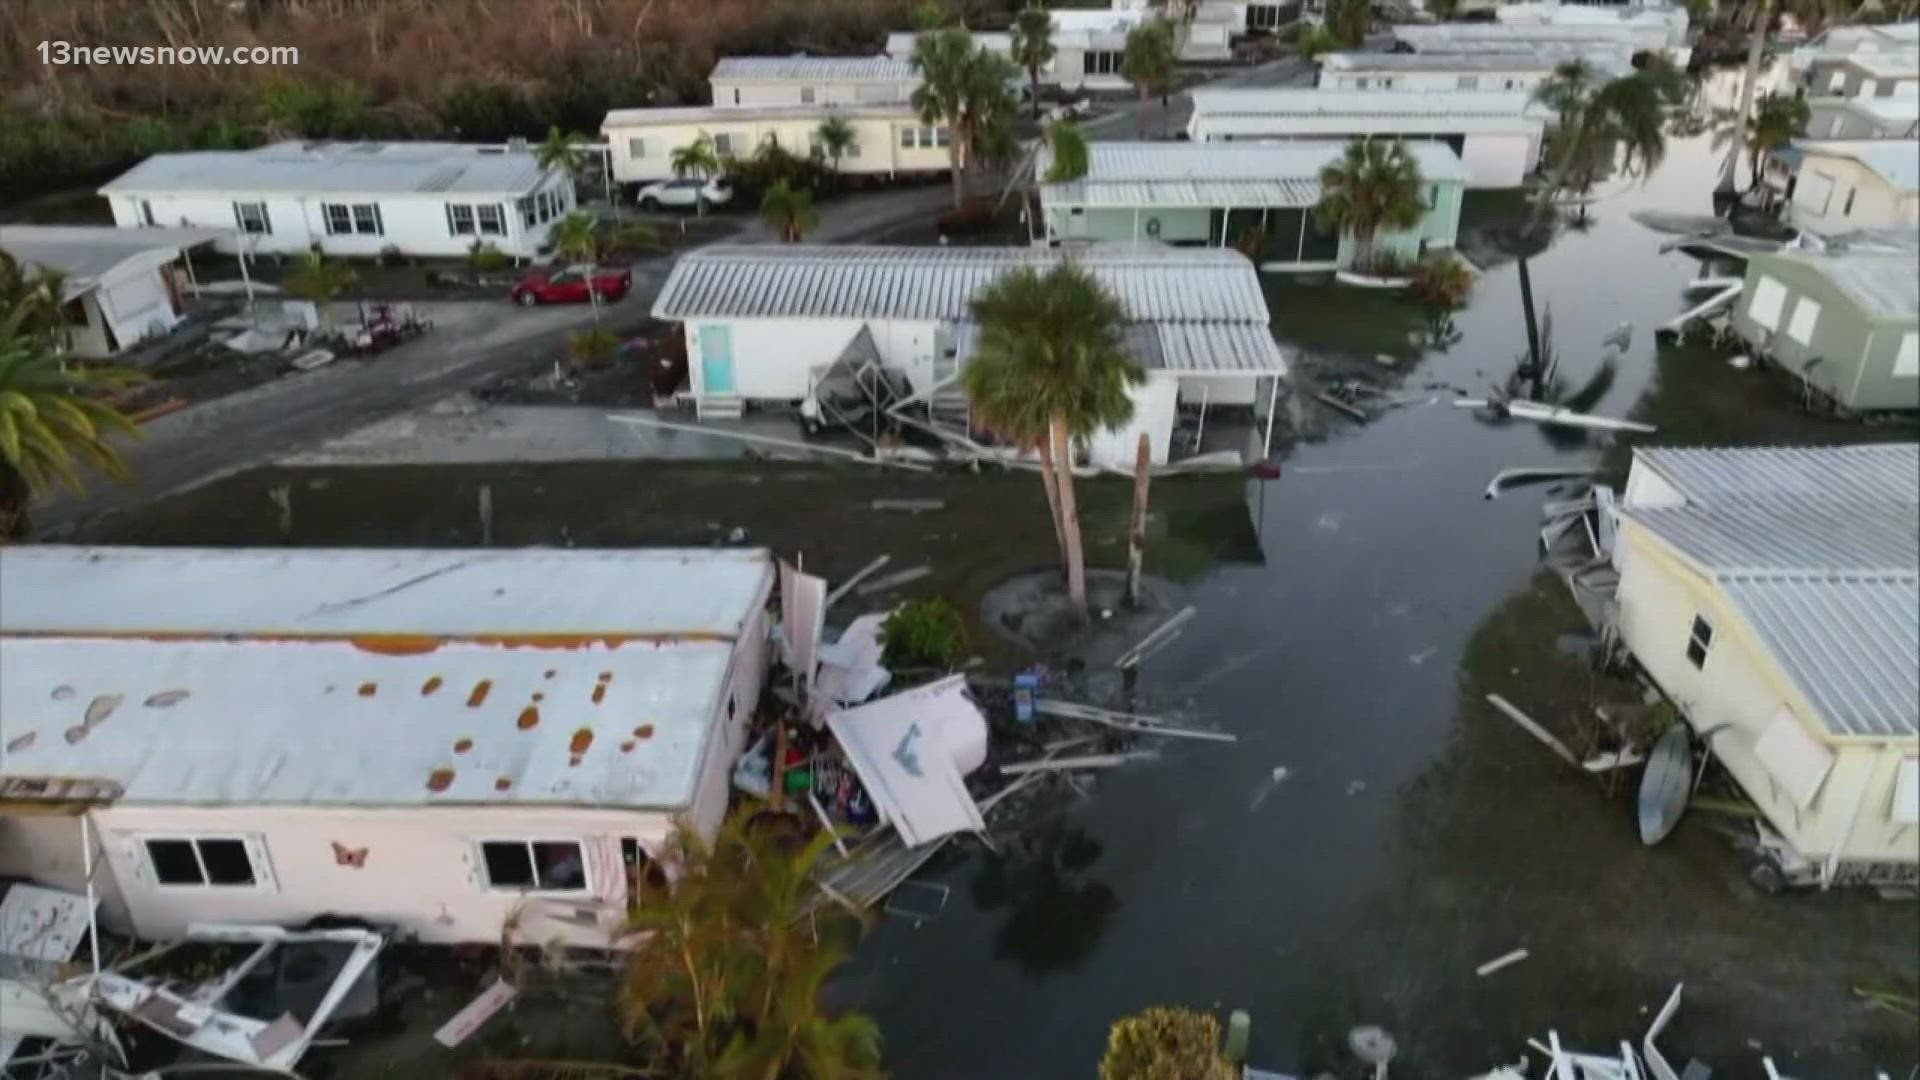 Now at least 104 deaths have been confirmed, 100 of those in Florida alone. Search and rescue operations are still underway across the southwestern coast of Florida.